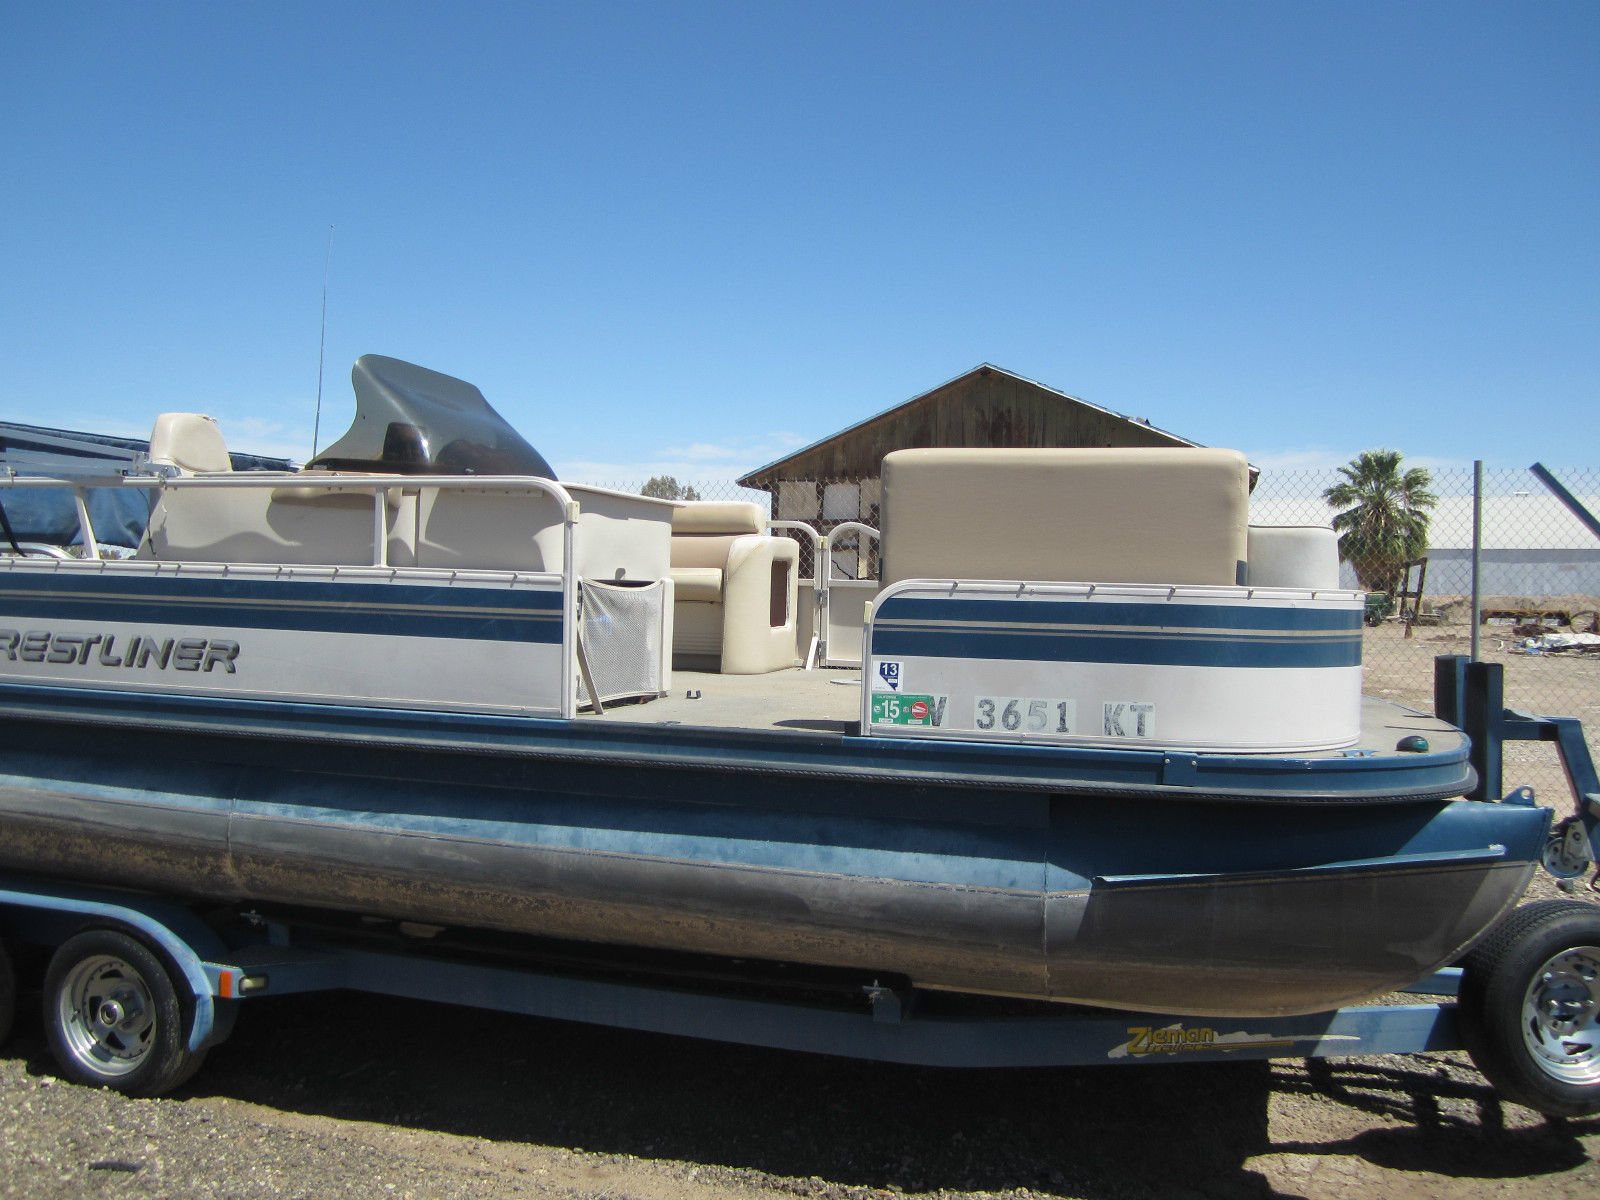 crestliner 2002 for sale for $5,999 - boats-from-usa.com